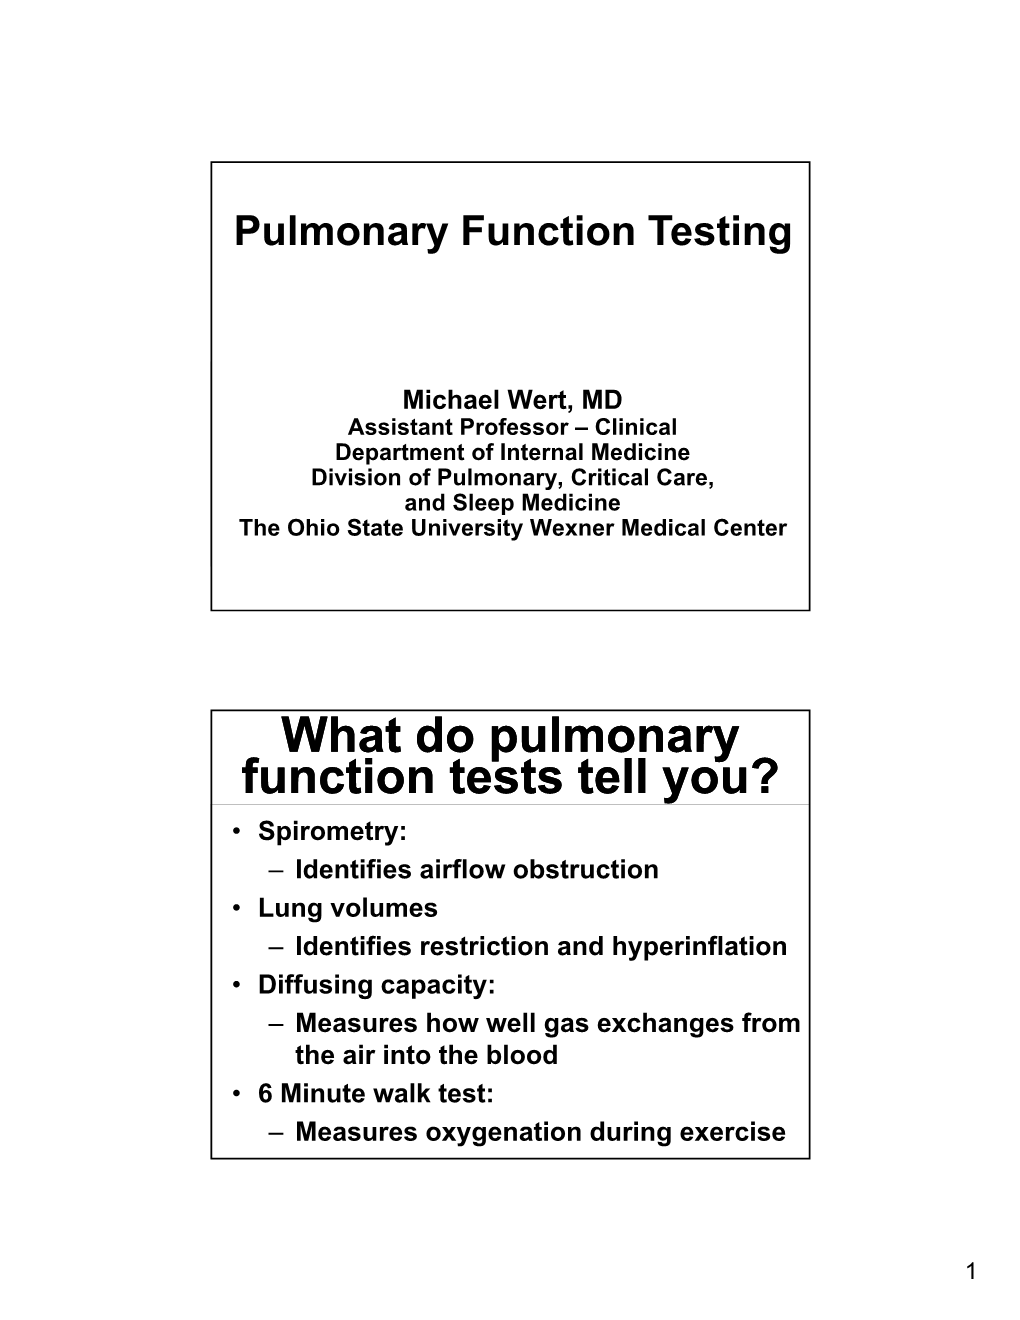 What Do Pulmonary Function Tests Tell You?